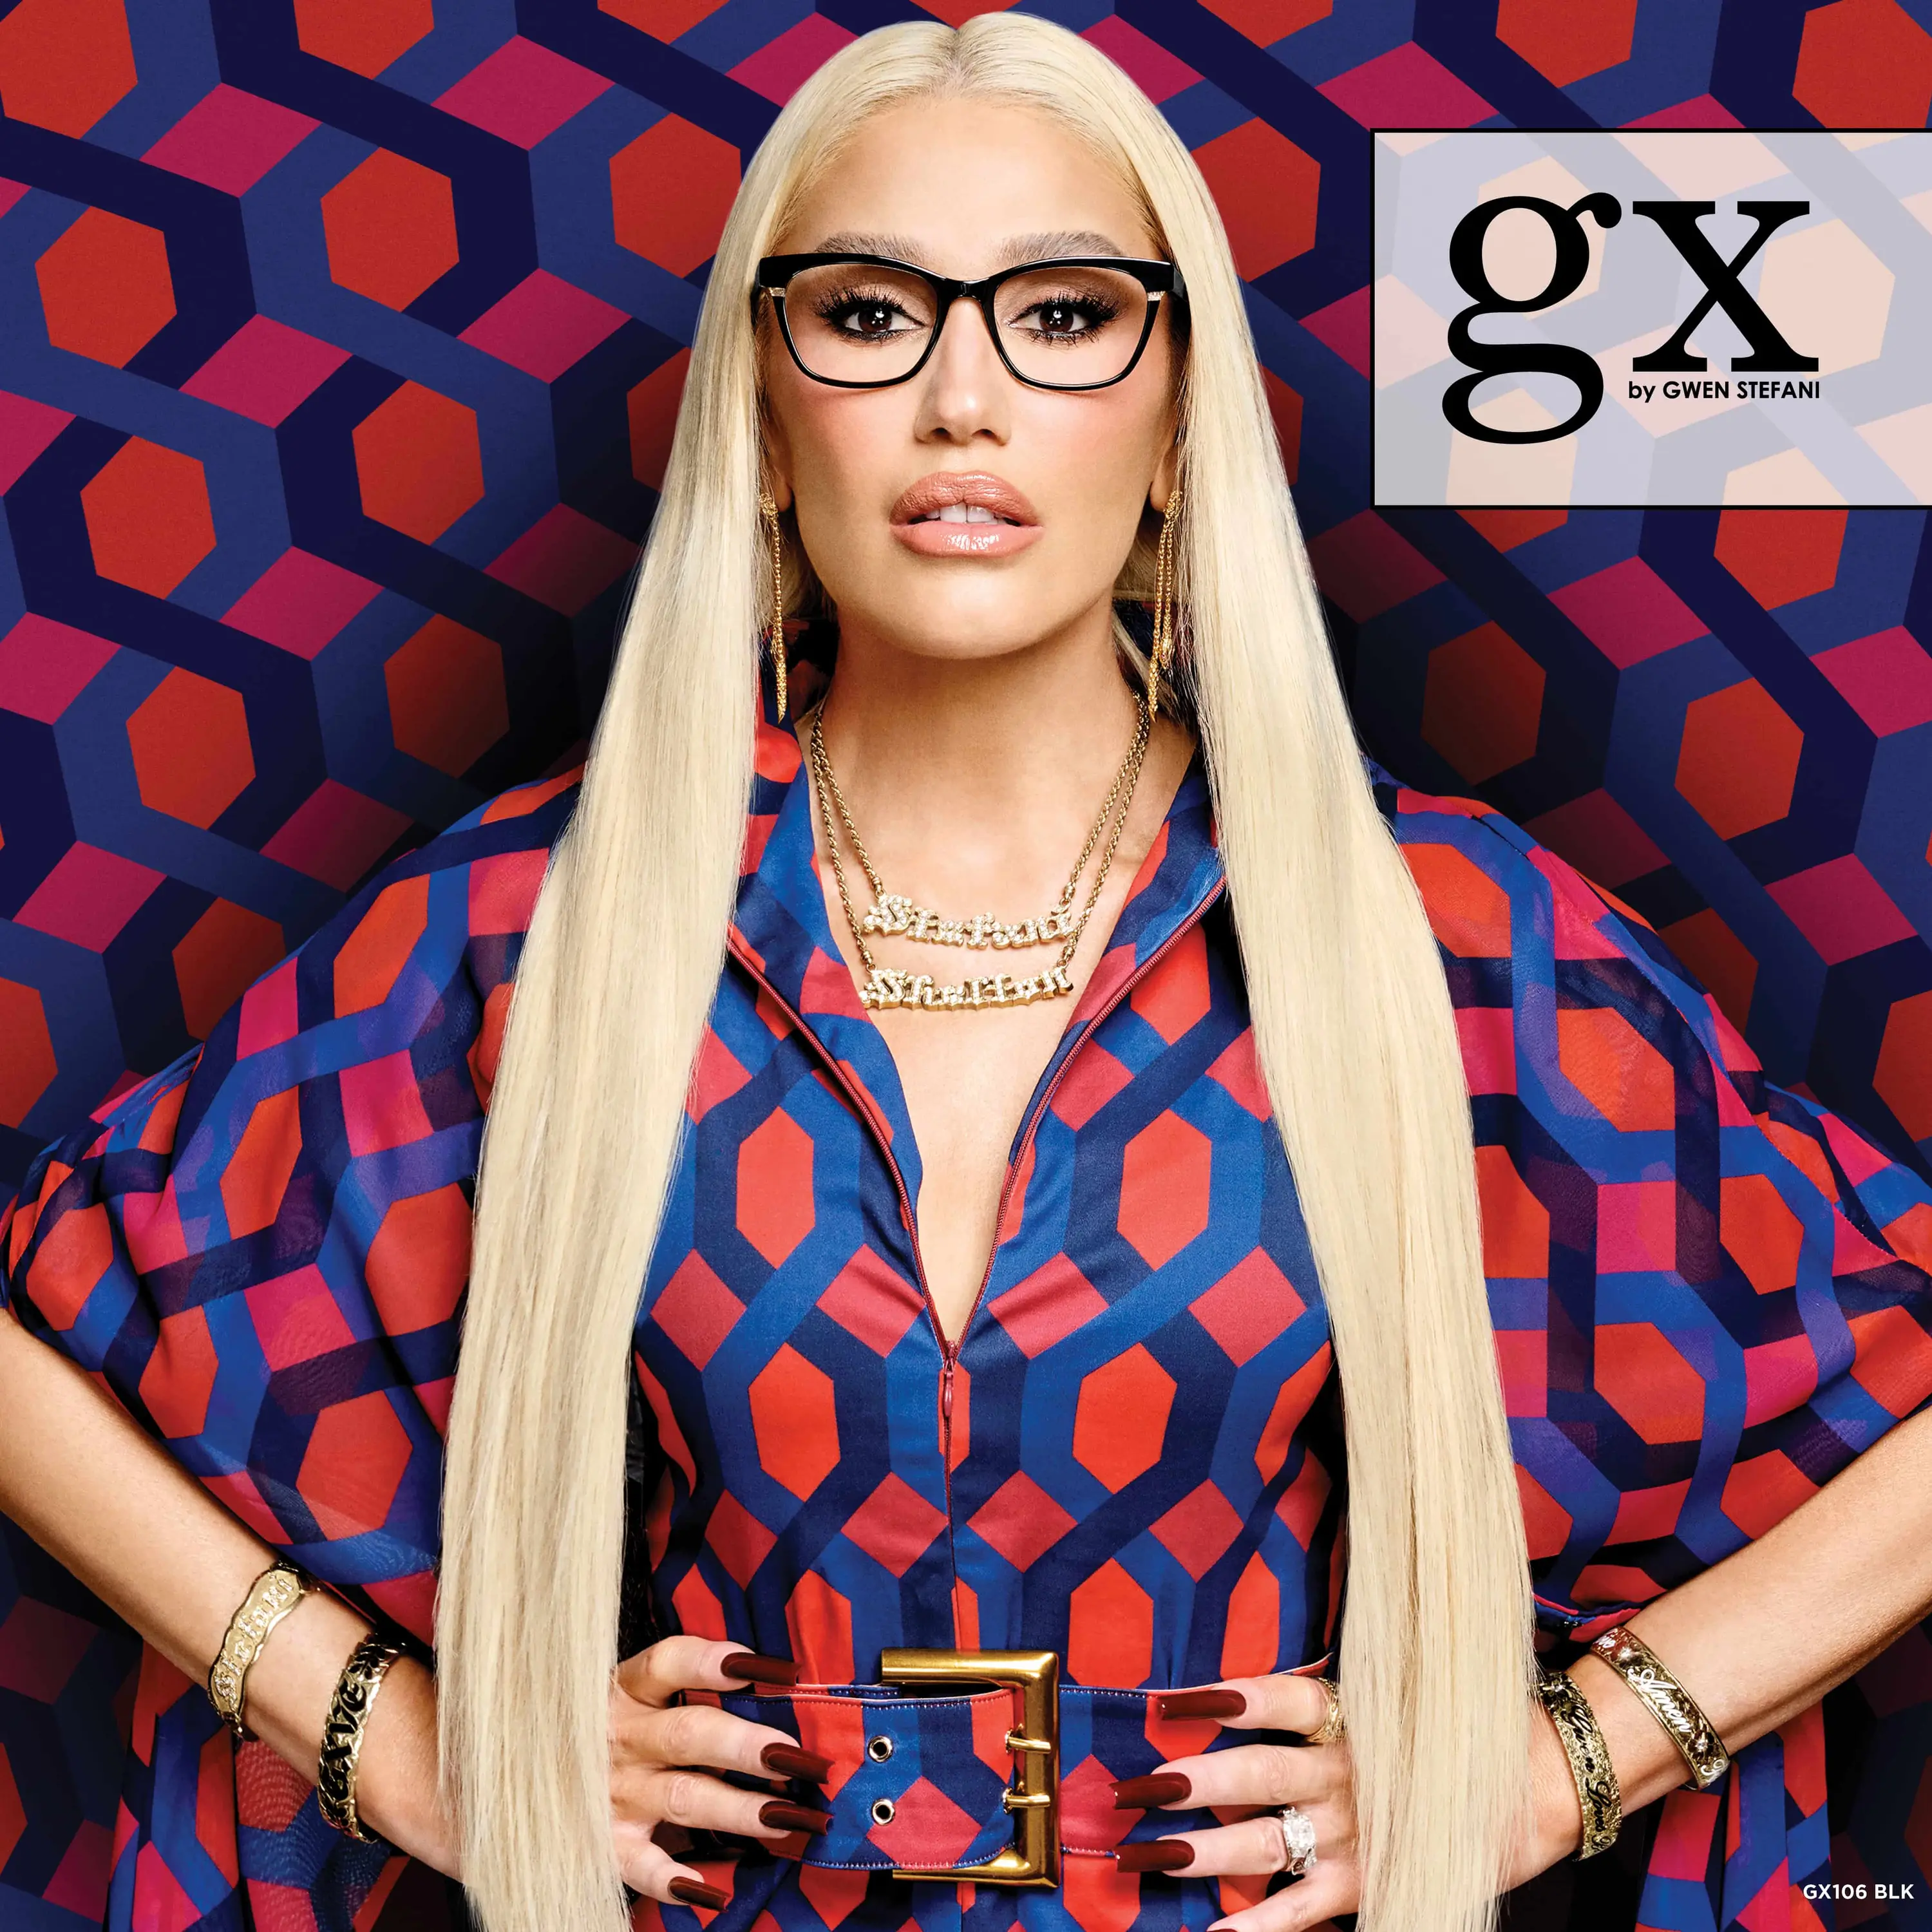 GX by Gwen Stefani: Create Your New Look